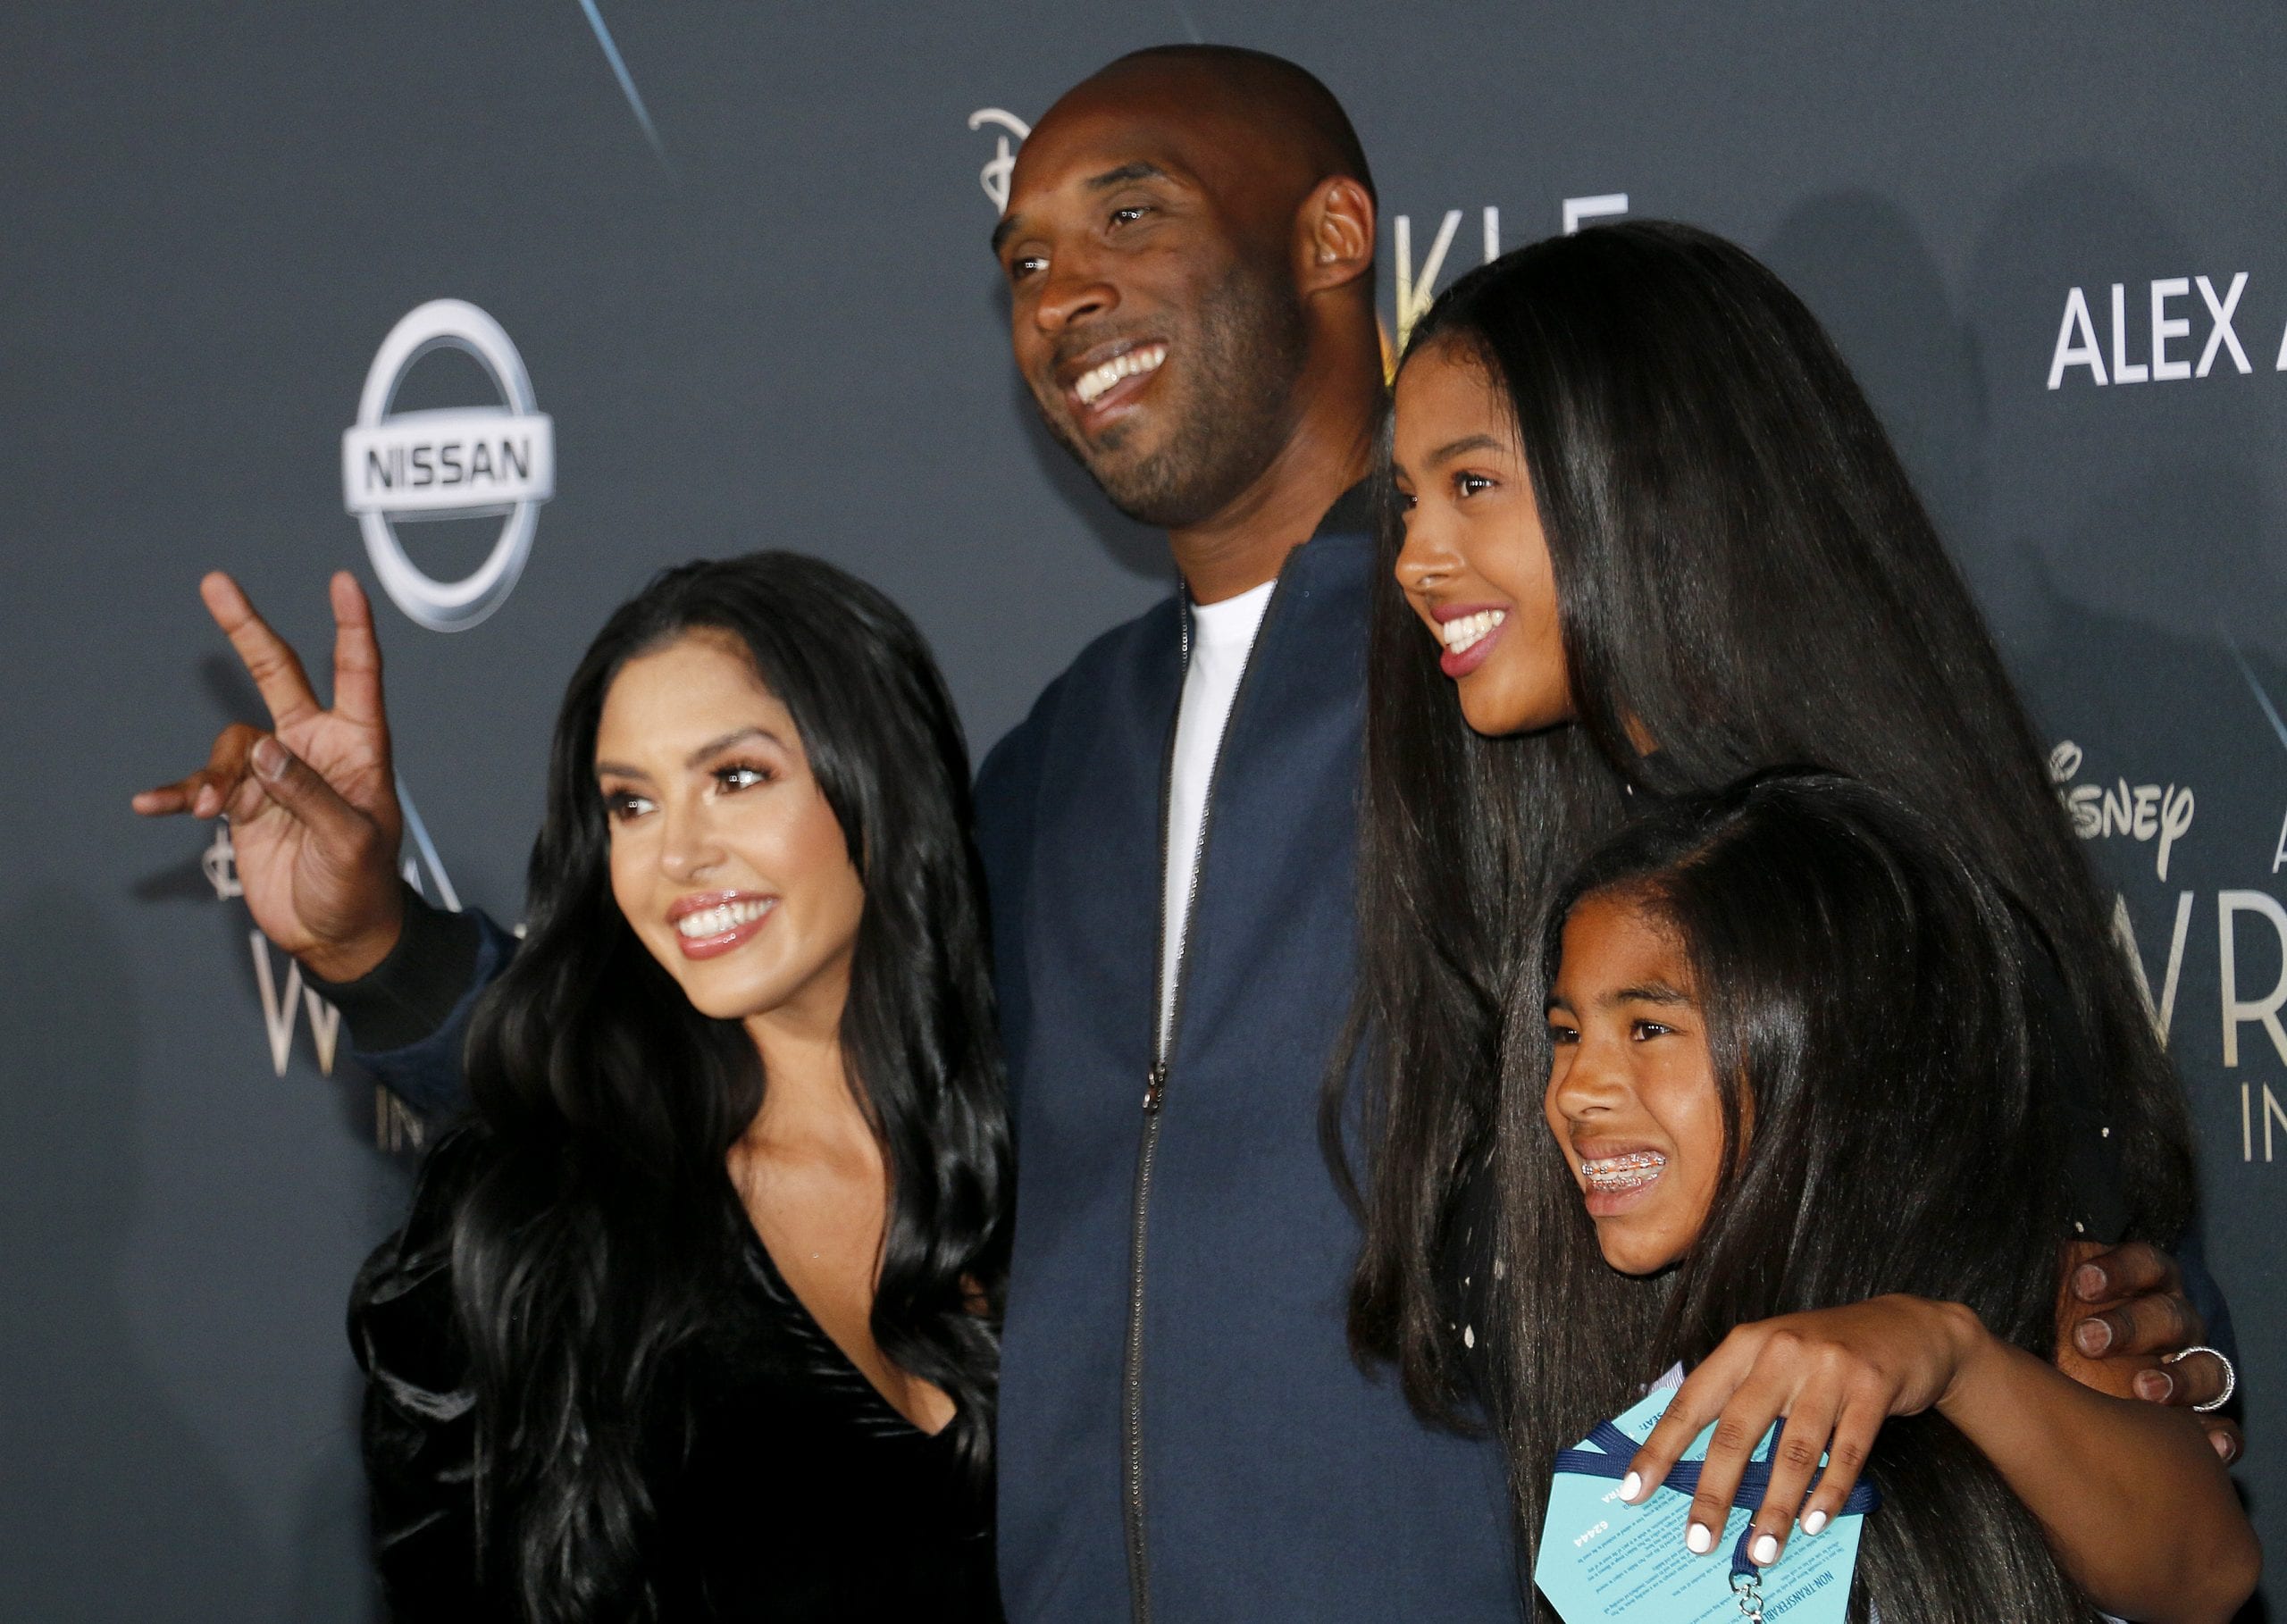 Report Says Pilot Became Disoriented Before Helicopter Crash That Killed Kobe Bryant and Eight Others